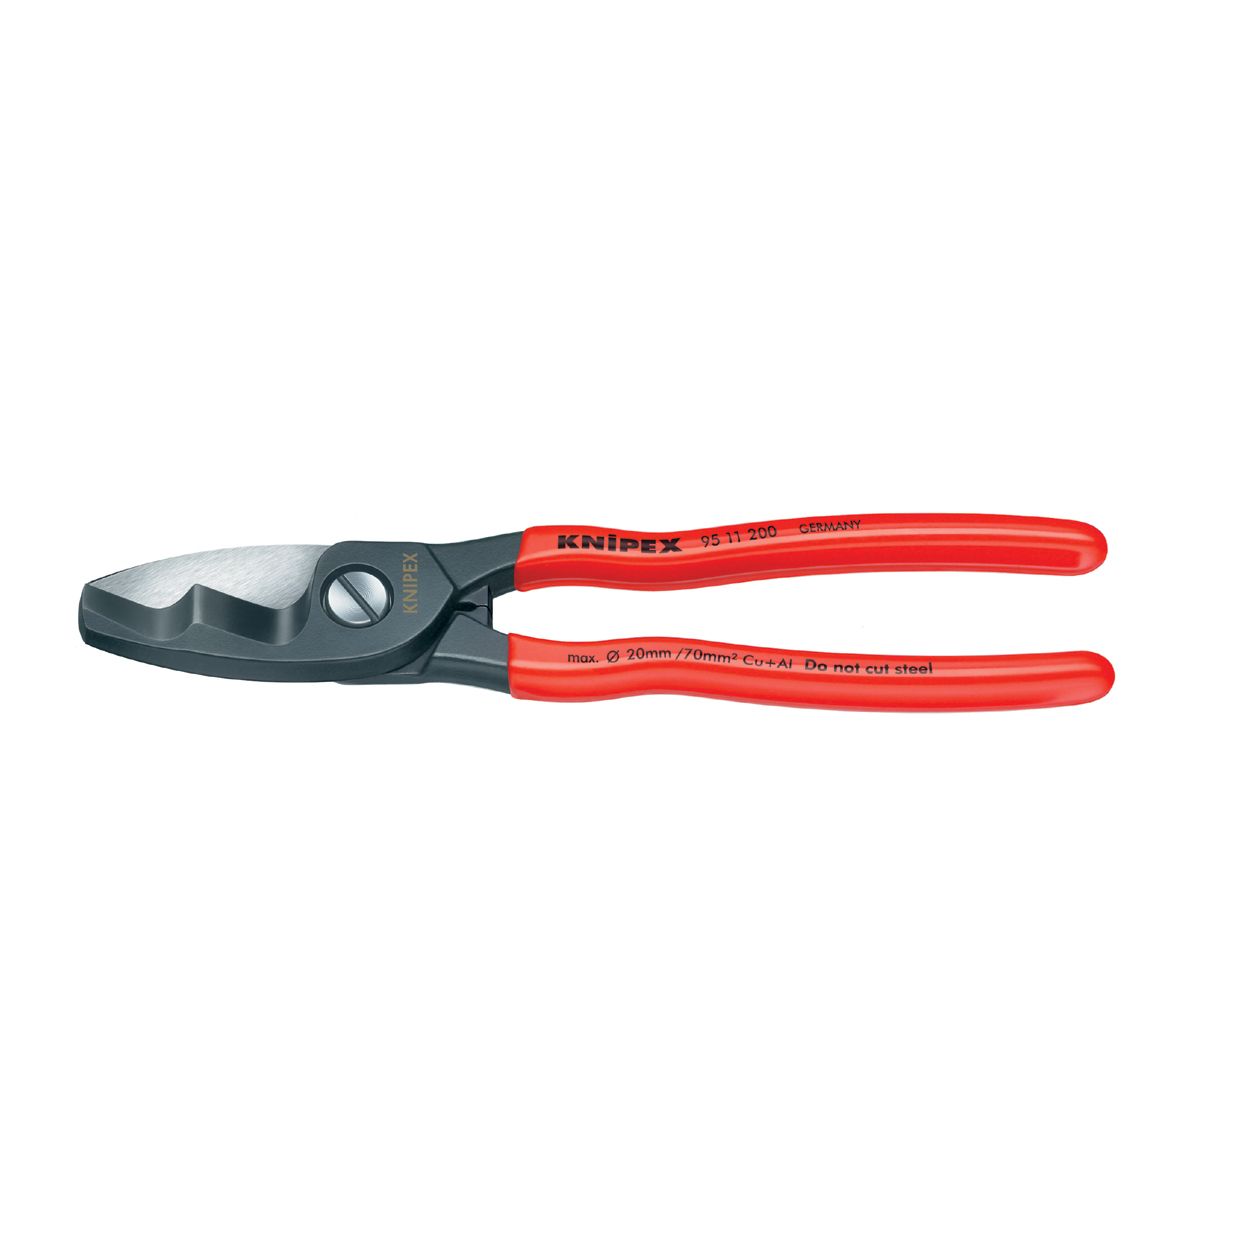 Knipex 8" Cable shears